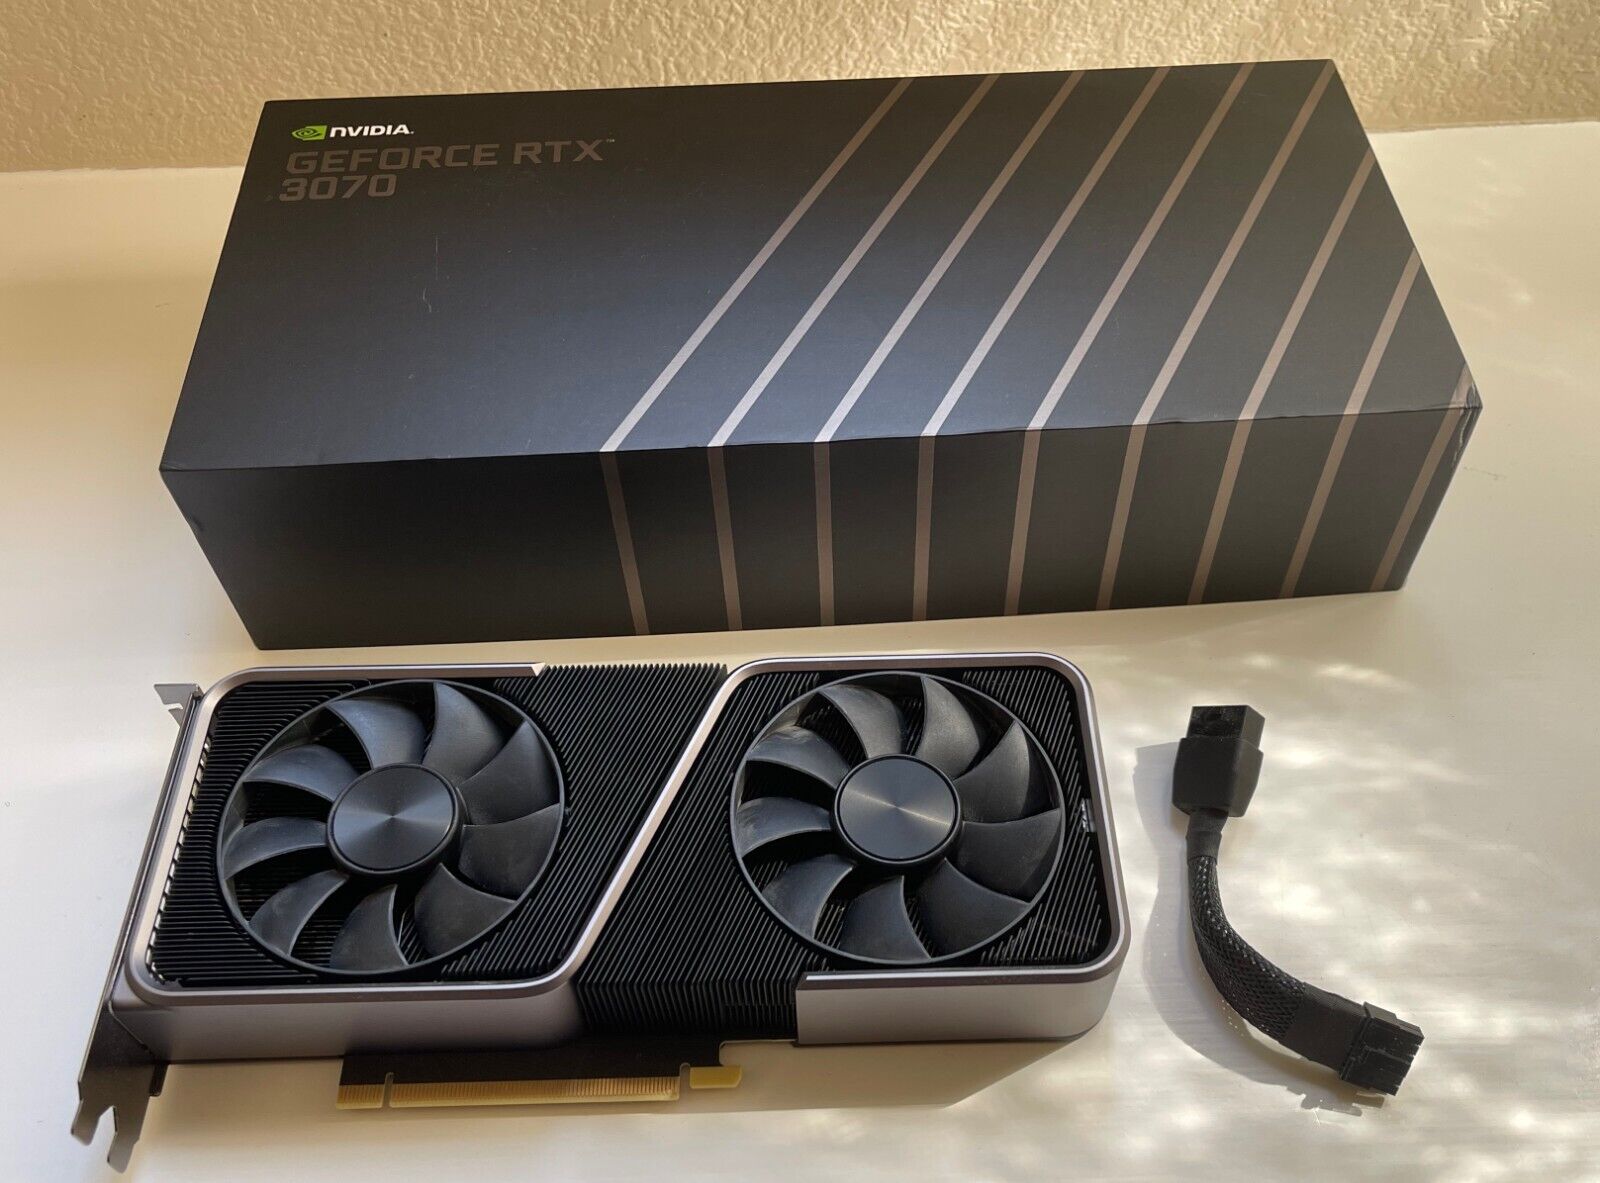 NVIDIA GeForce RTX 3070 Founders Edition 8GB GDDR6 Graphics Card - Excellent